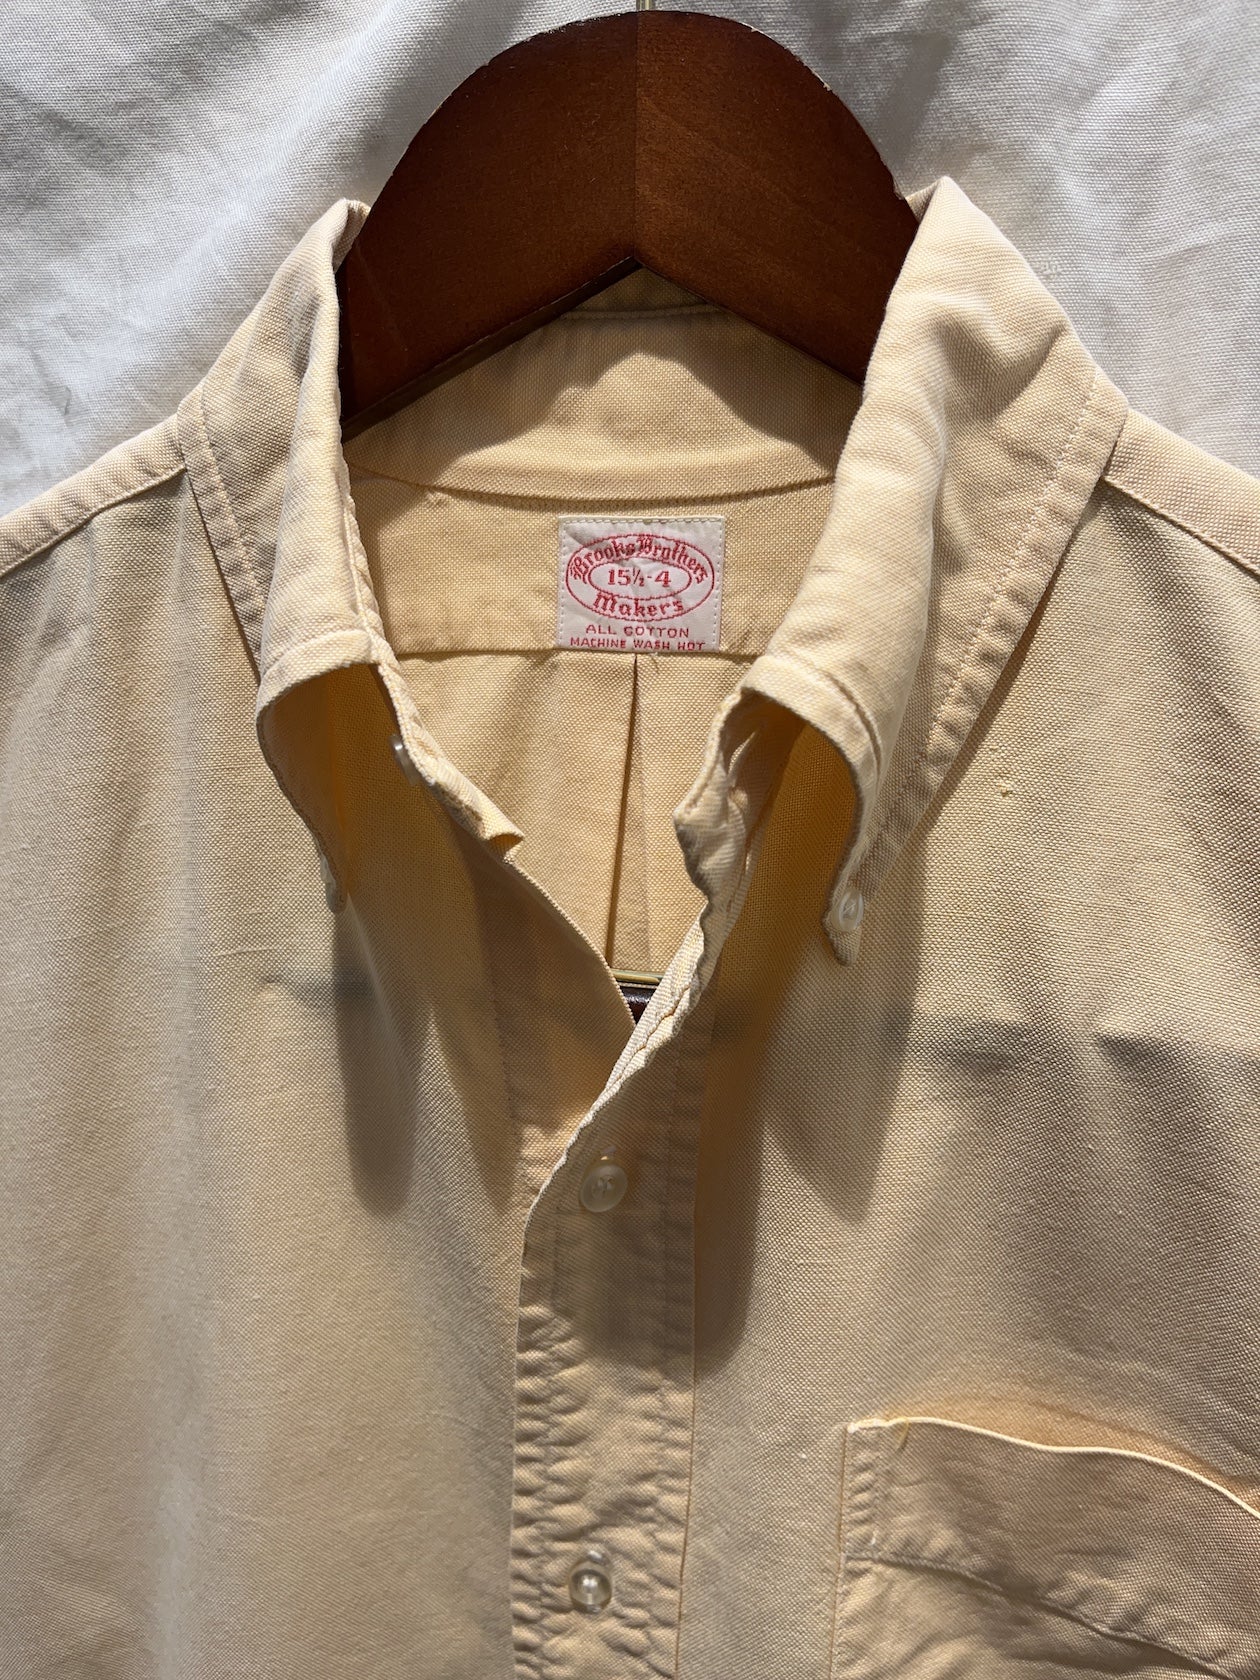 VINTAGE BROOKS BROTHERS MADE IN U.S.A | ILLMINATE blog